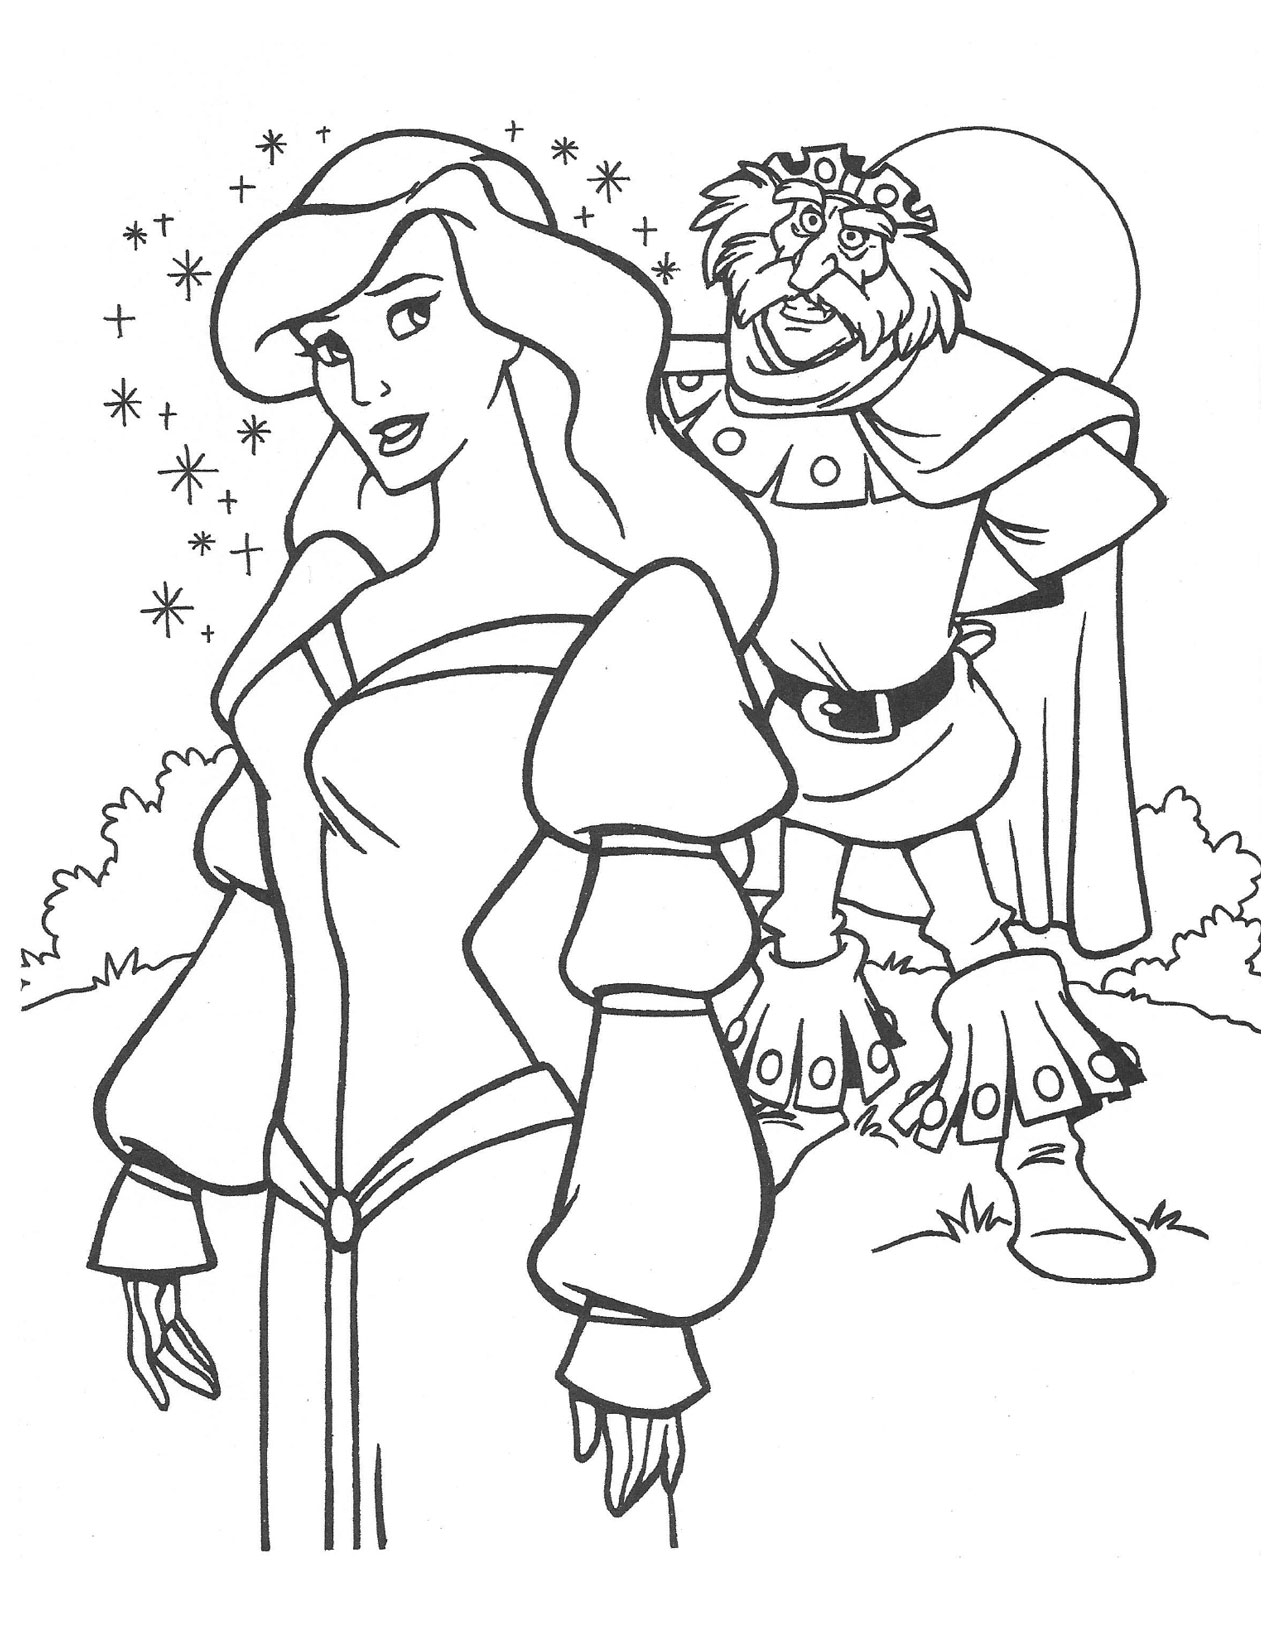 Swan Princess Odette and Rothbart coloring page